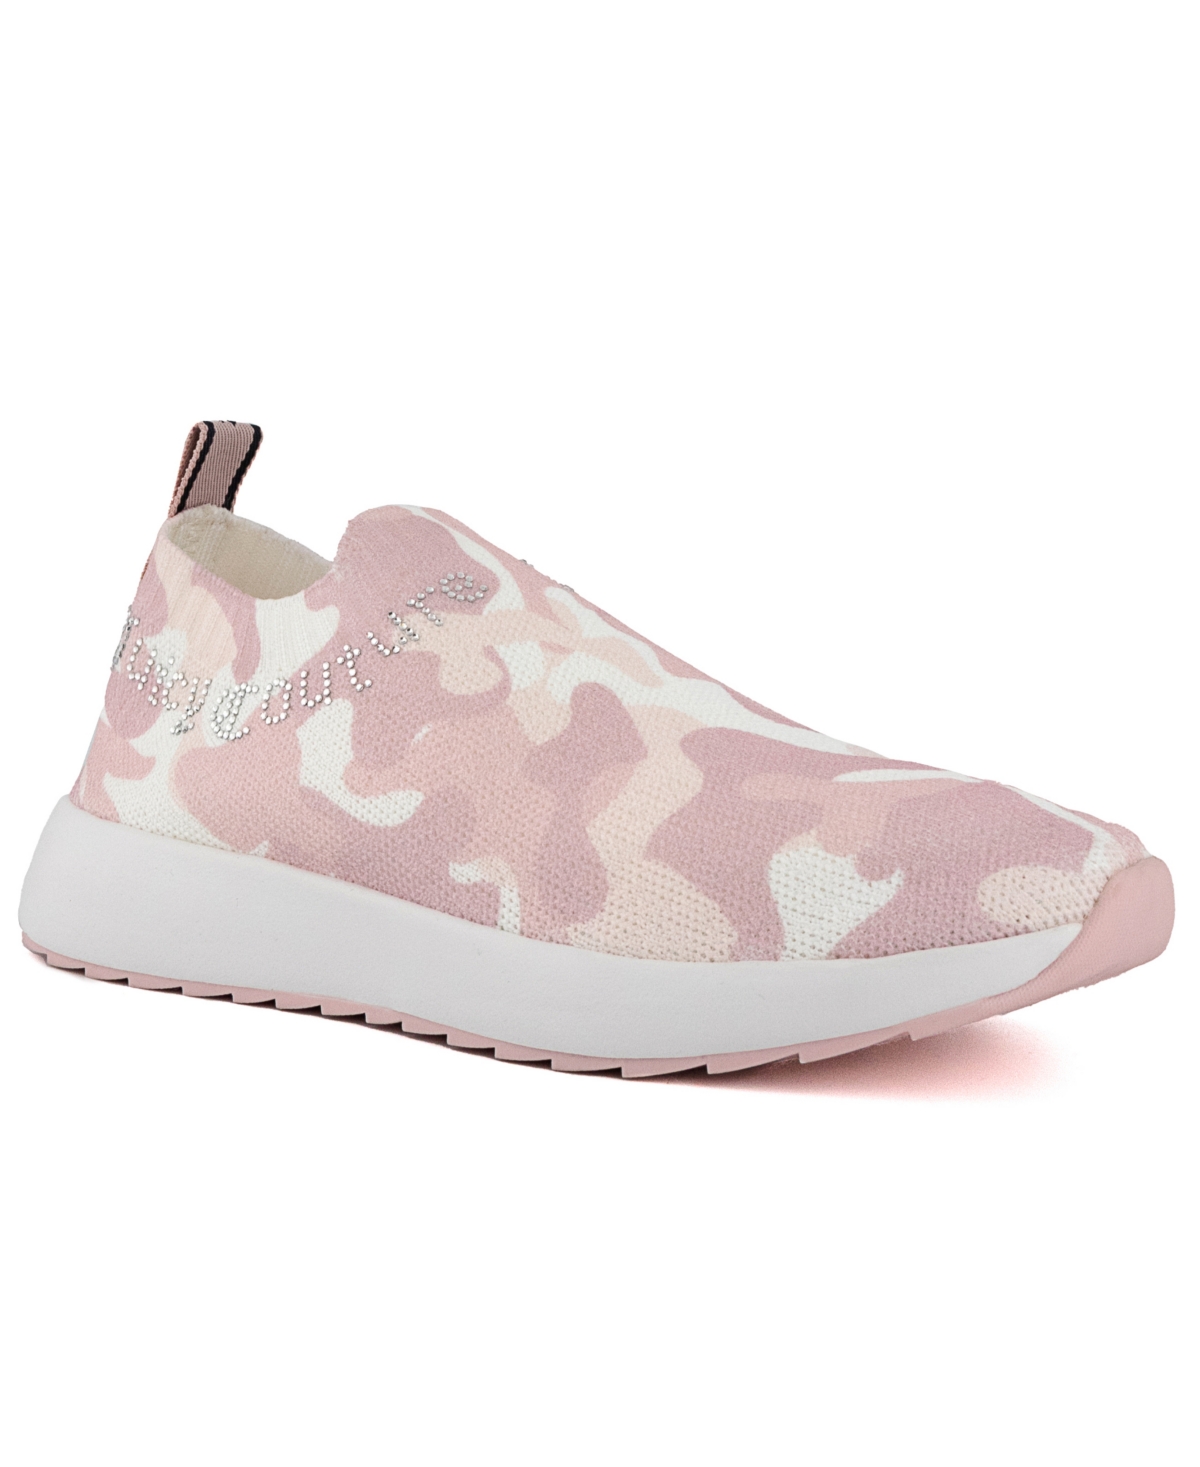 Juicy Couture Women's Avarie Knit Slip-on Joggers Sneakers In Blush